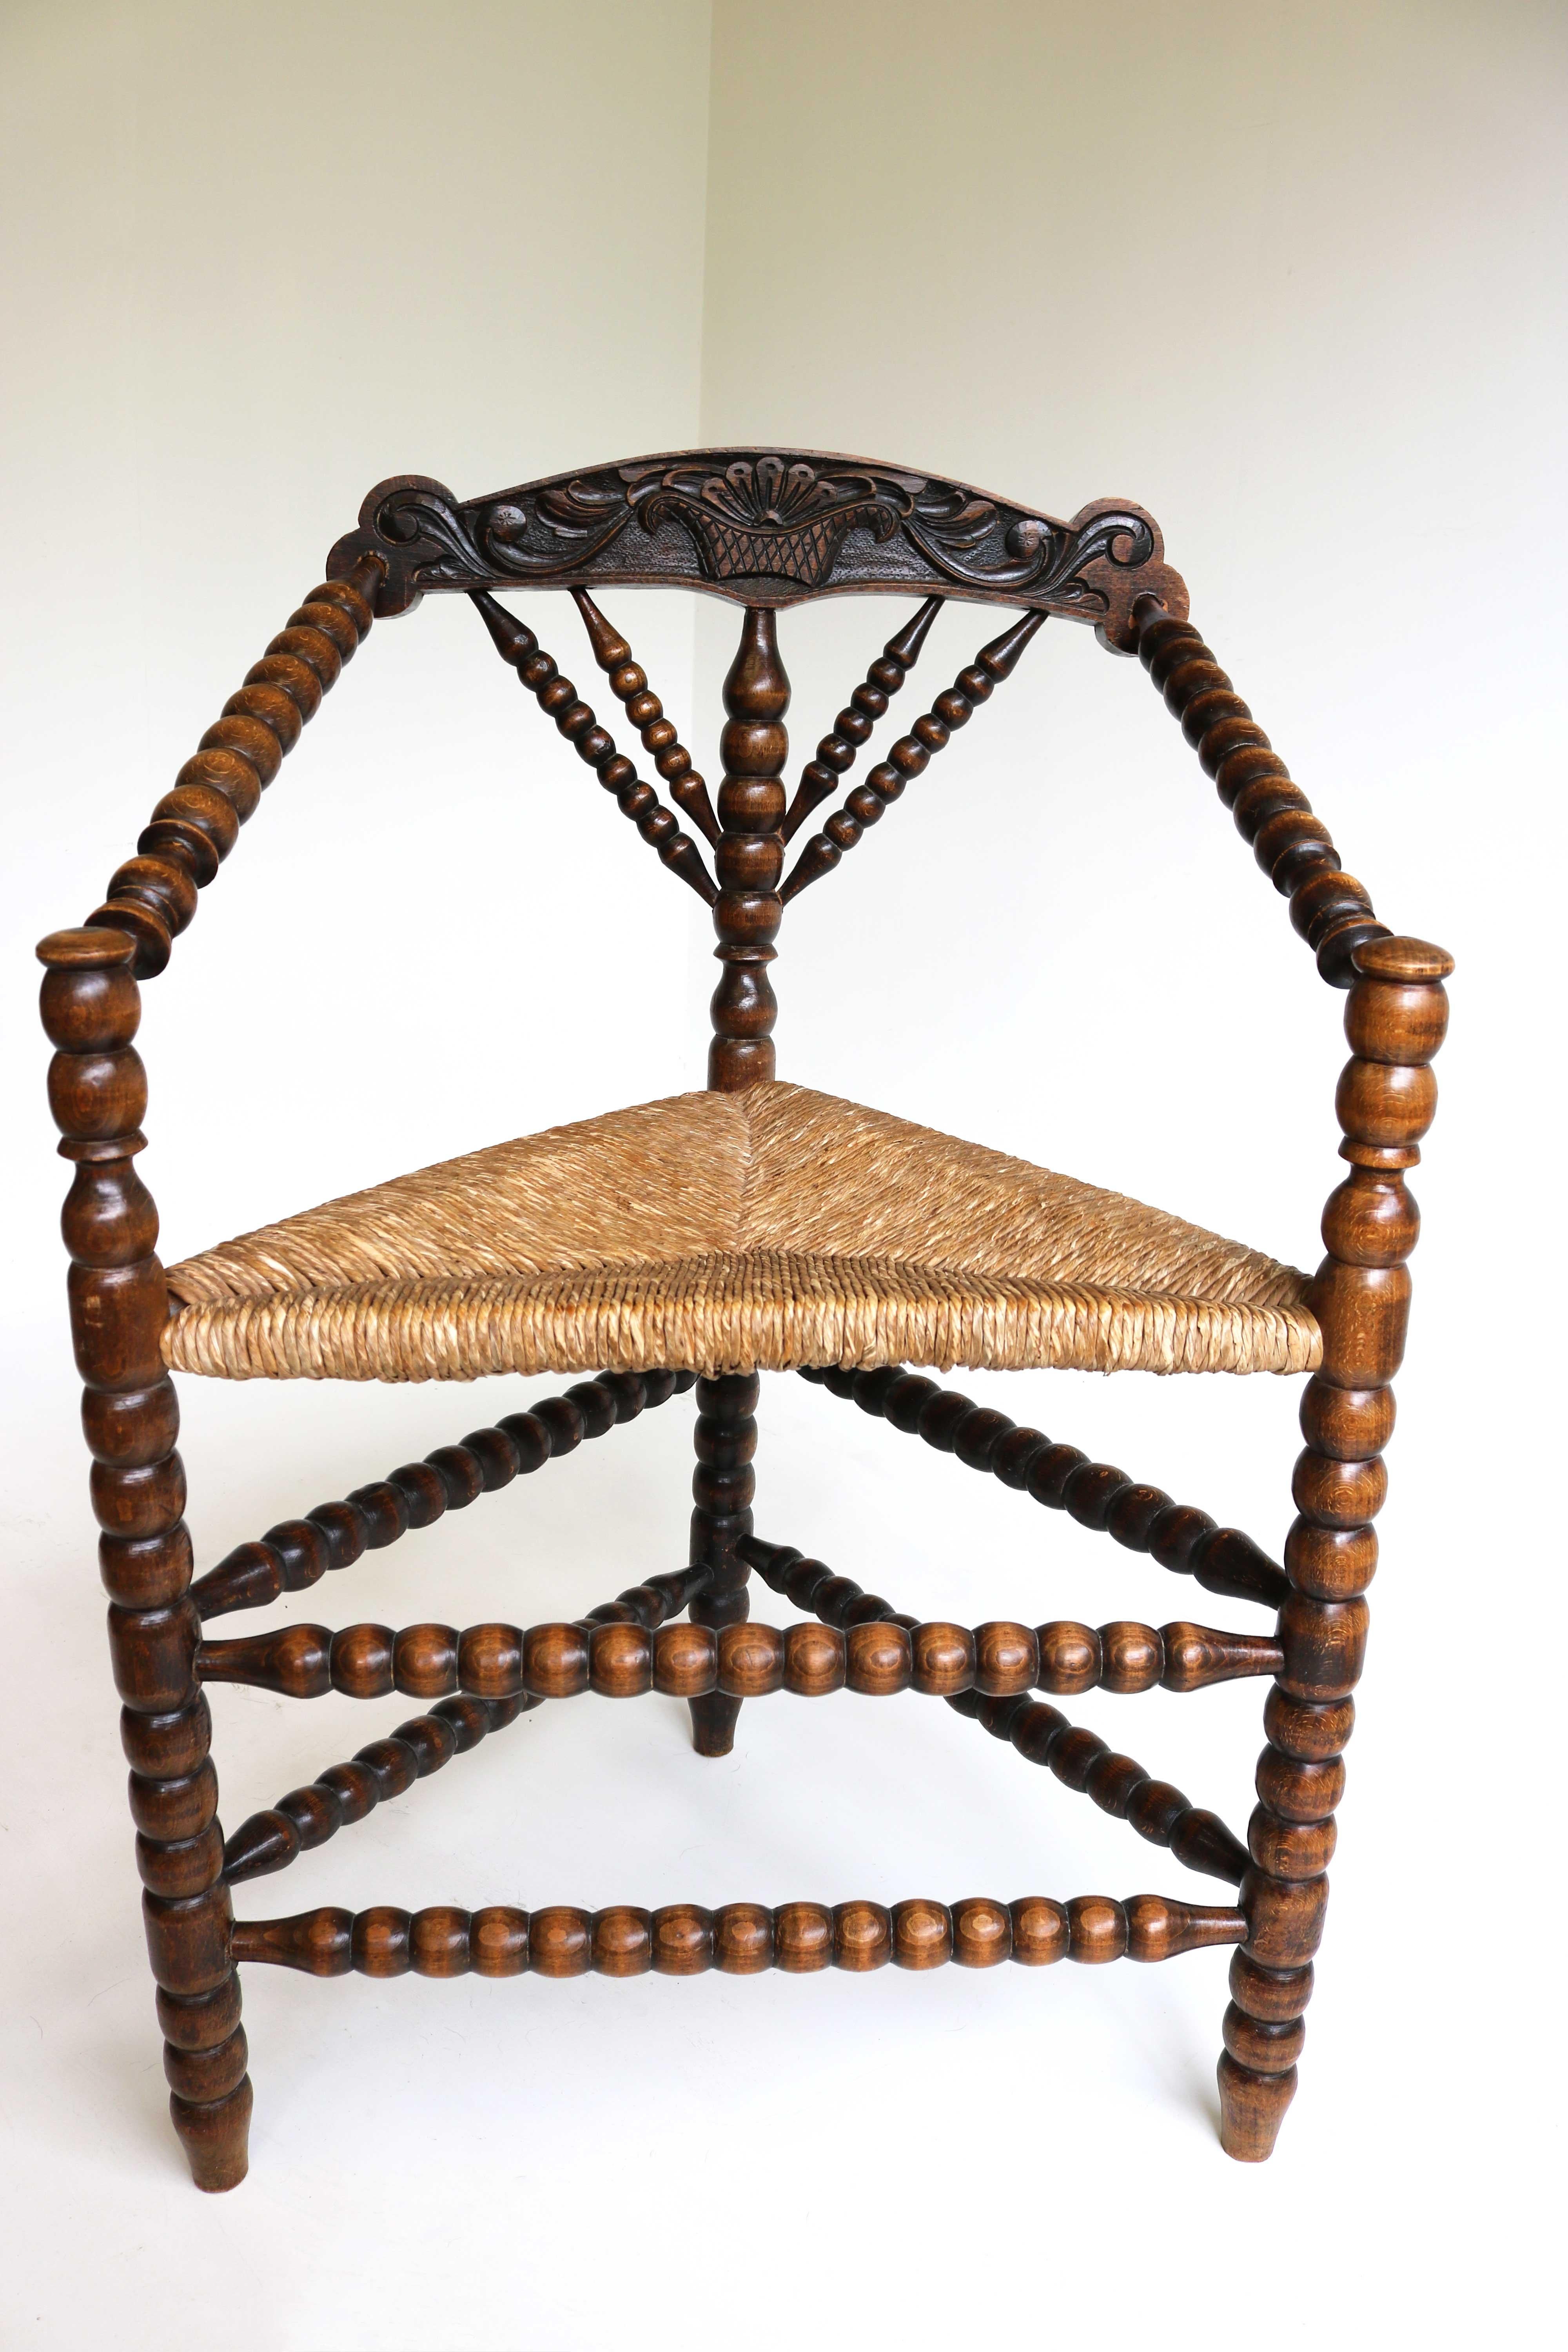 Late 19th century bobbin turned wood armchair with rush seat, ca 1900
Manufactured in The Netherlands.
Beautiful antique bobbin/ knitting chair with three legs and with a carved flower basket in the back, very decorative.
This old Dutch chair